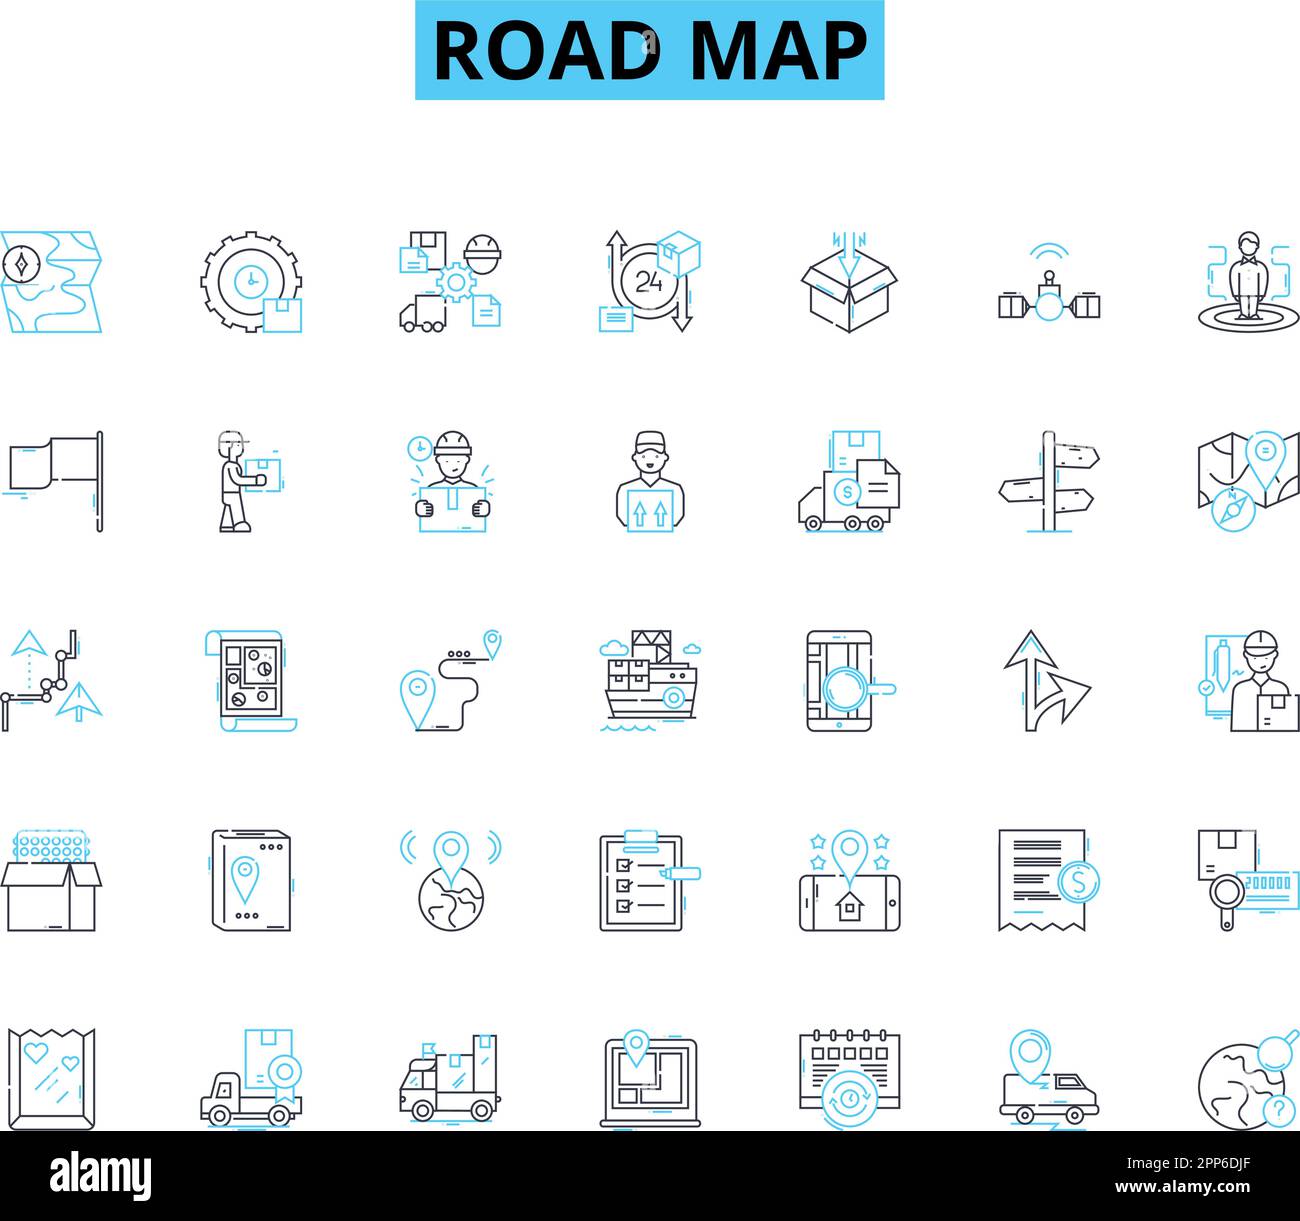 Road map linear icons set. Navigation, Directions, Routes, Planning, Markings, Symbols, Signs line vector and concept signs. Pathways,Highways Stock Vector